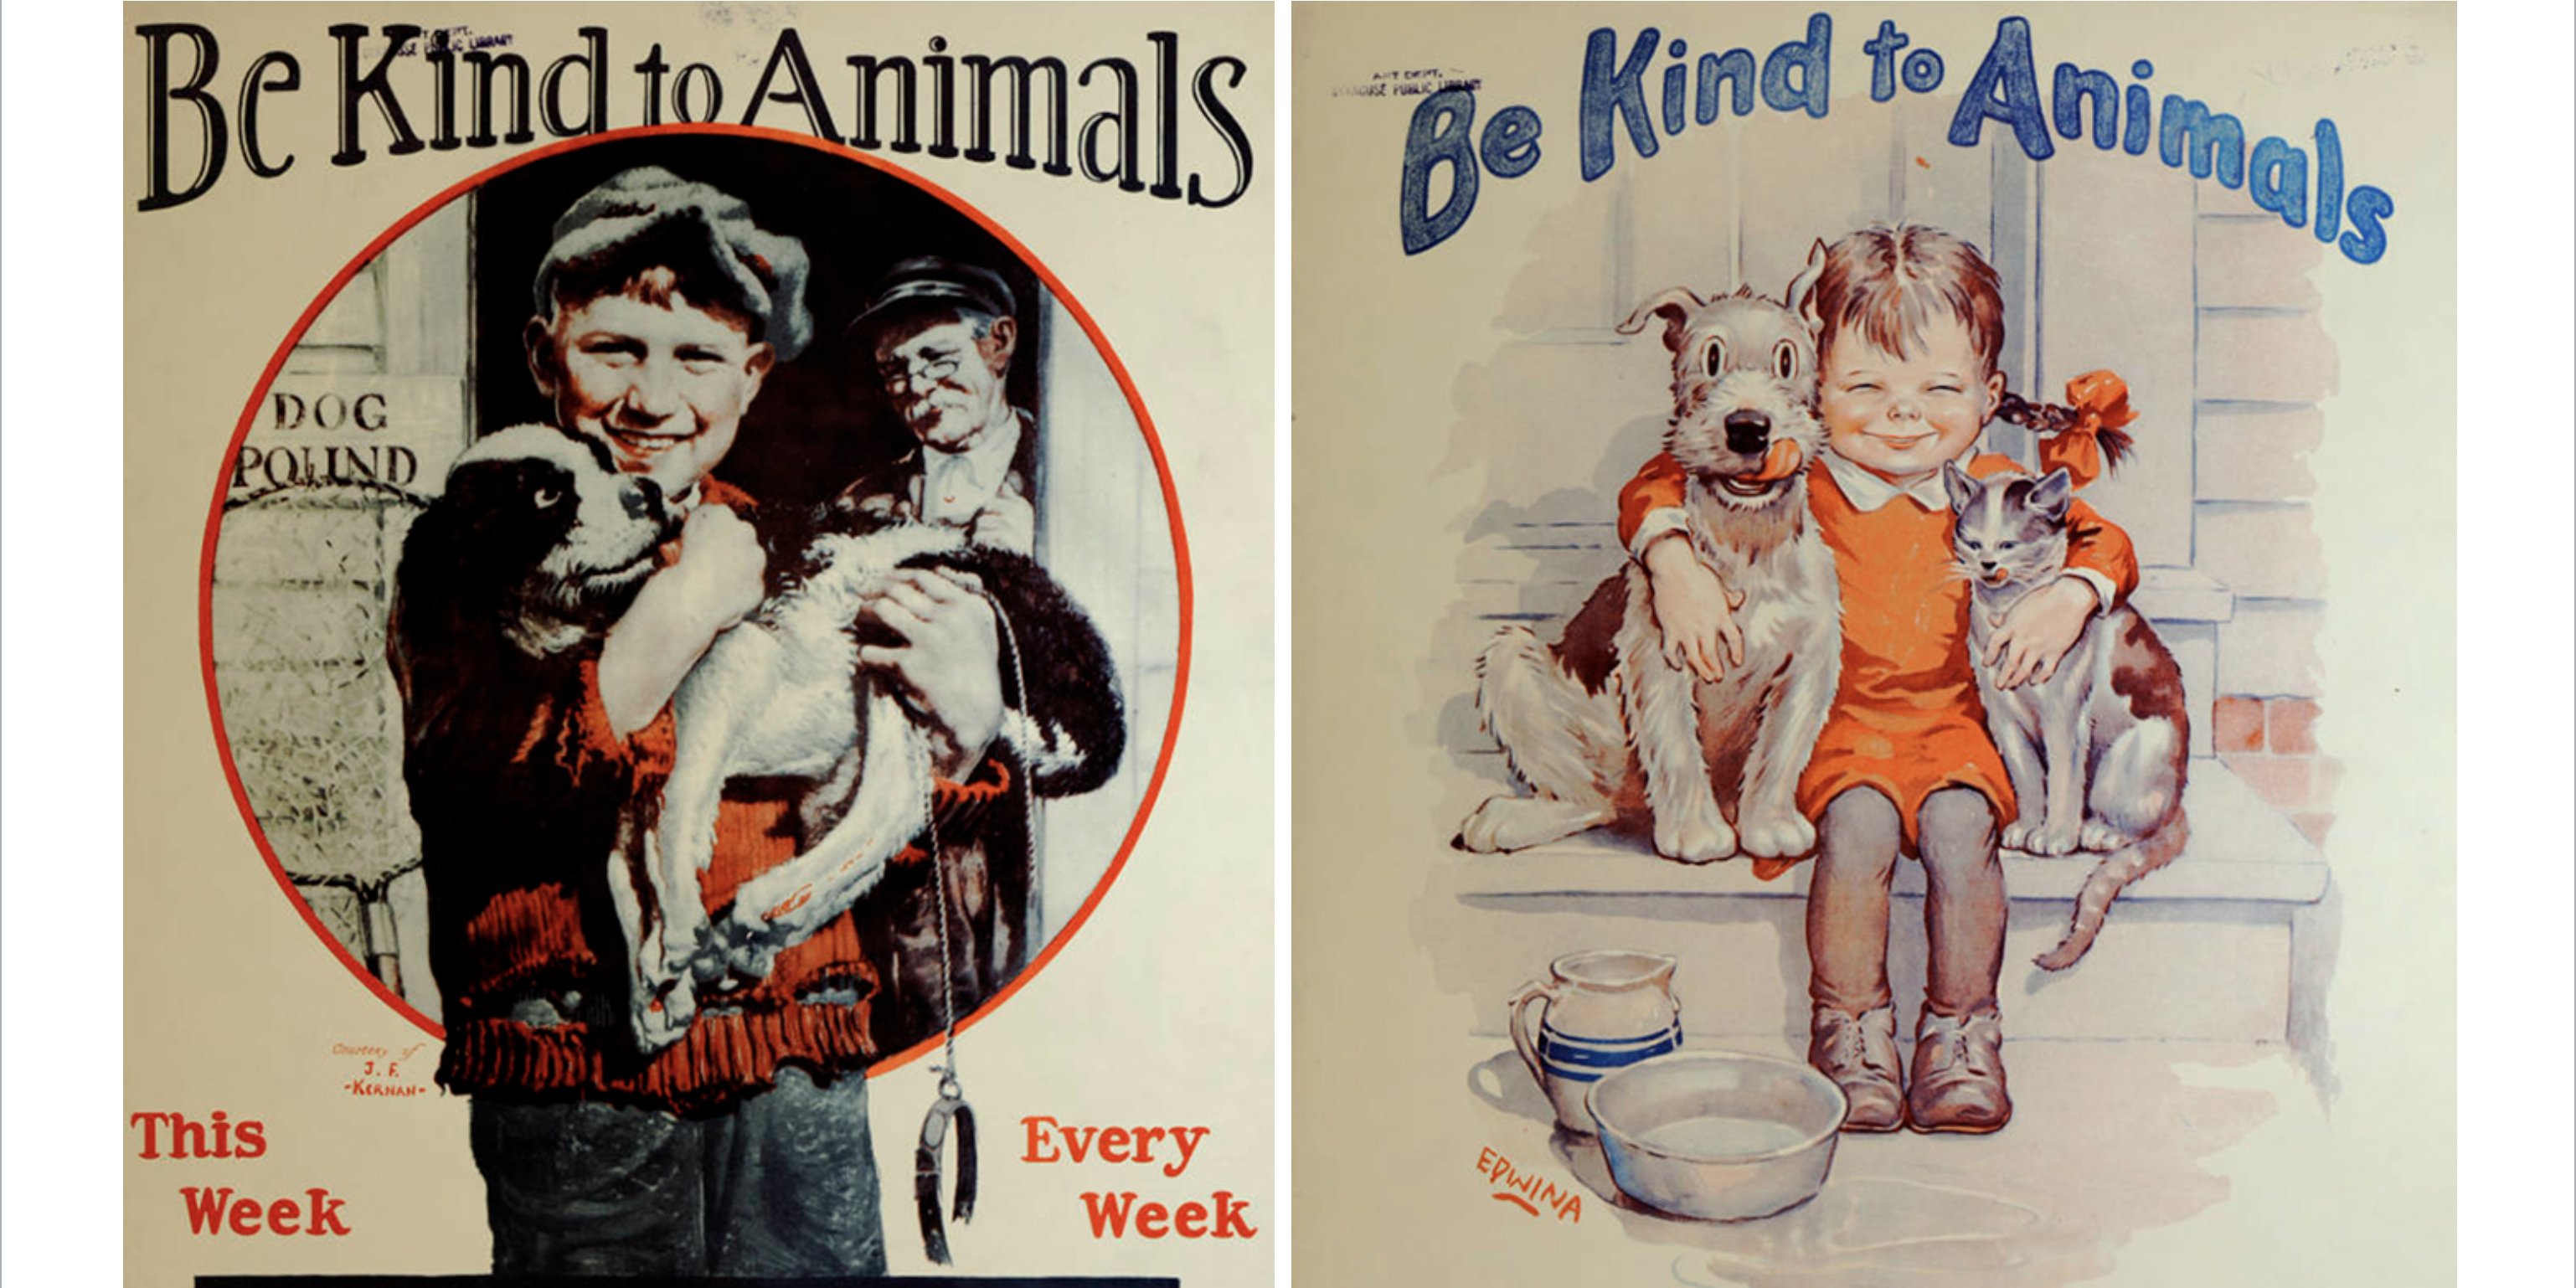 screen shot 2019 07 15 at 11 24 03 pm e1563200721276.png?resize=412,275 - 17 Adorable "Be Kind To Animals" Posters From The 1930s